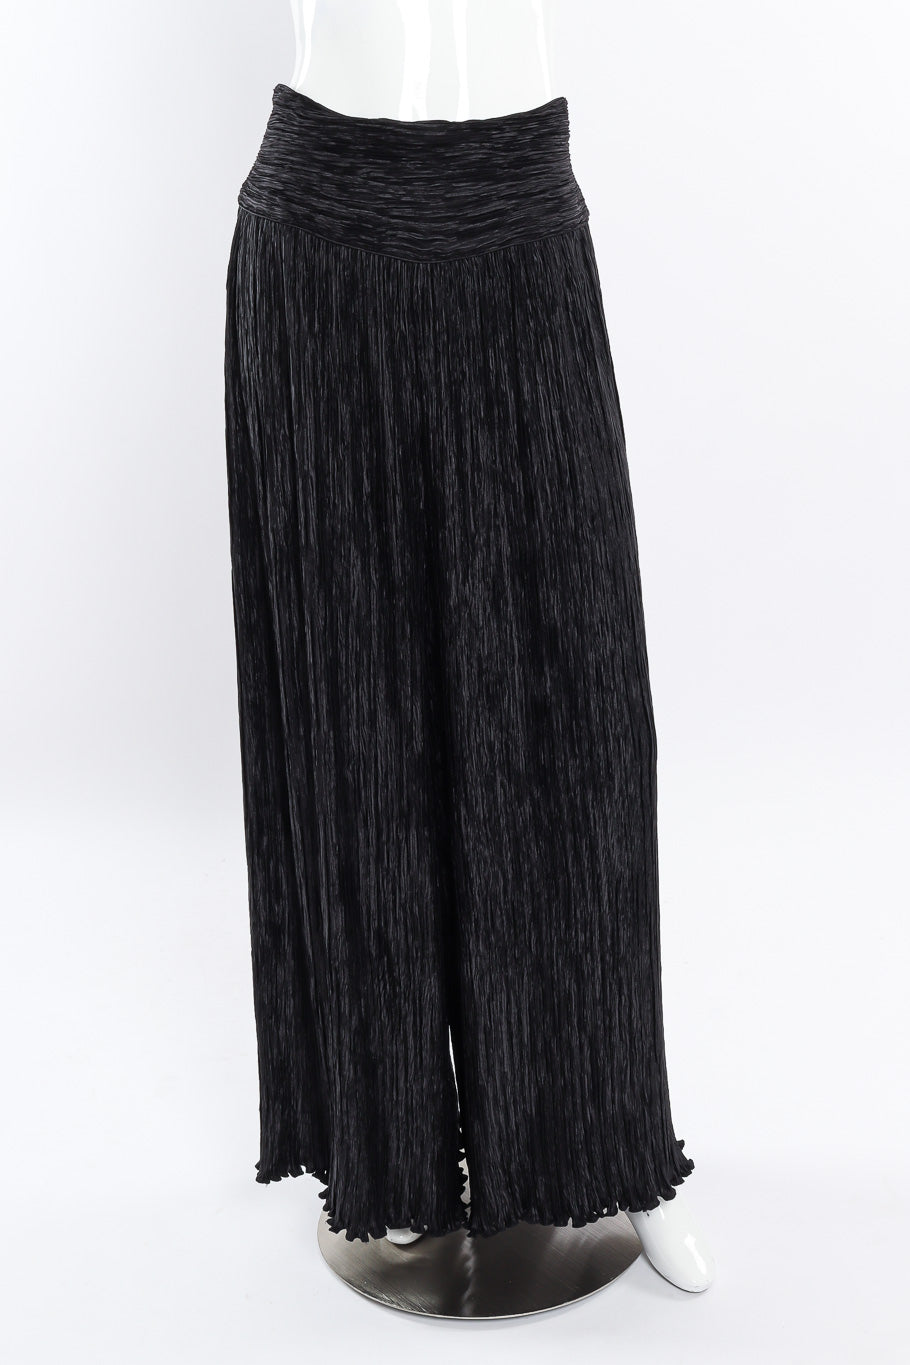 Pleated palazzo pant by Mary McFadden on mannequin front @recessla